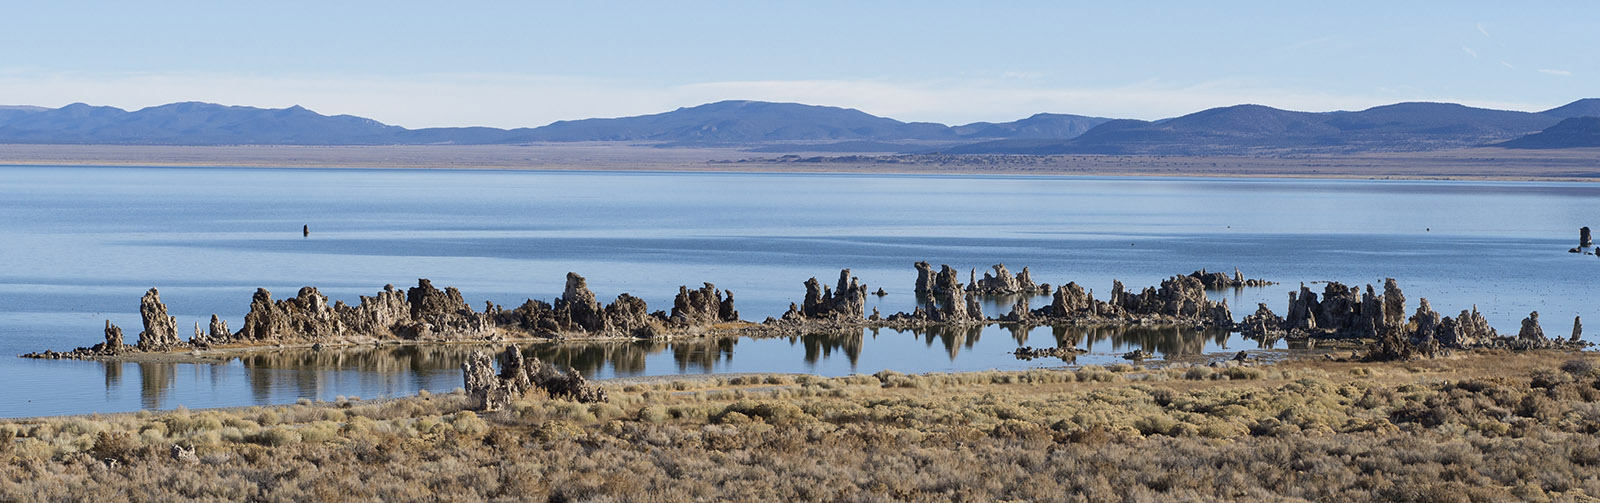 Tufa towers in Mono Lake:  Calcium carbonate deposits form when calcium rich waters from hot springs mix with carbonate-rich lake water.